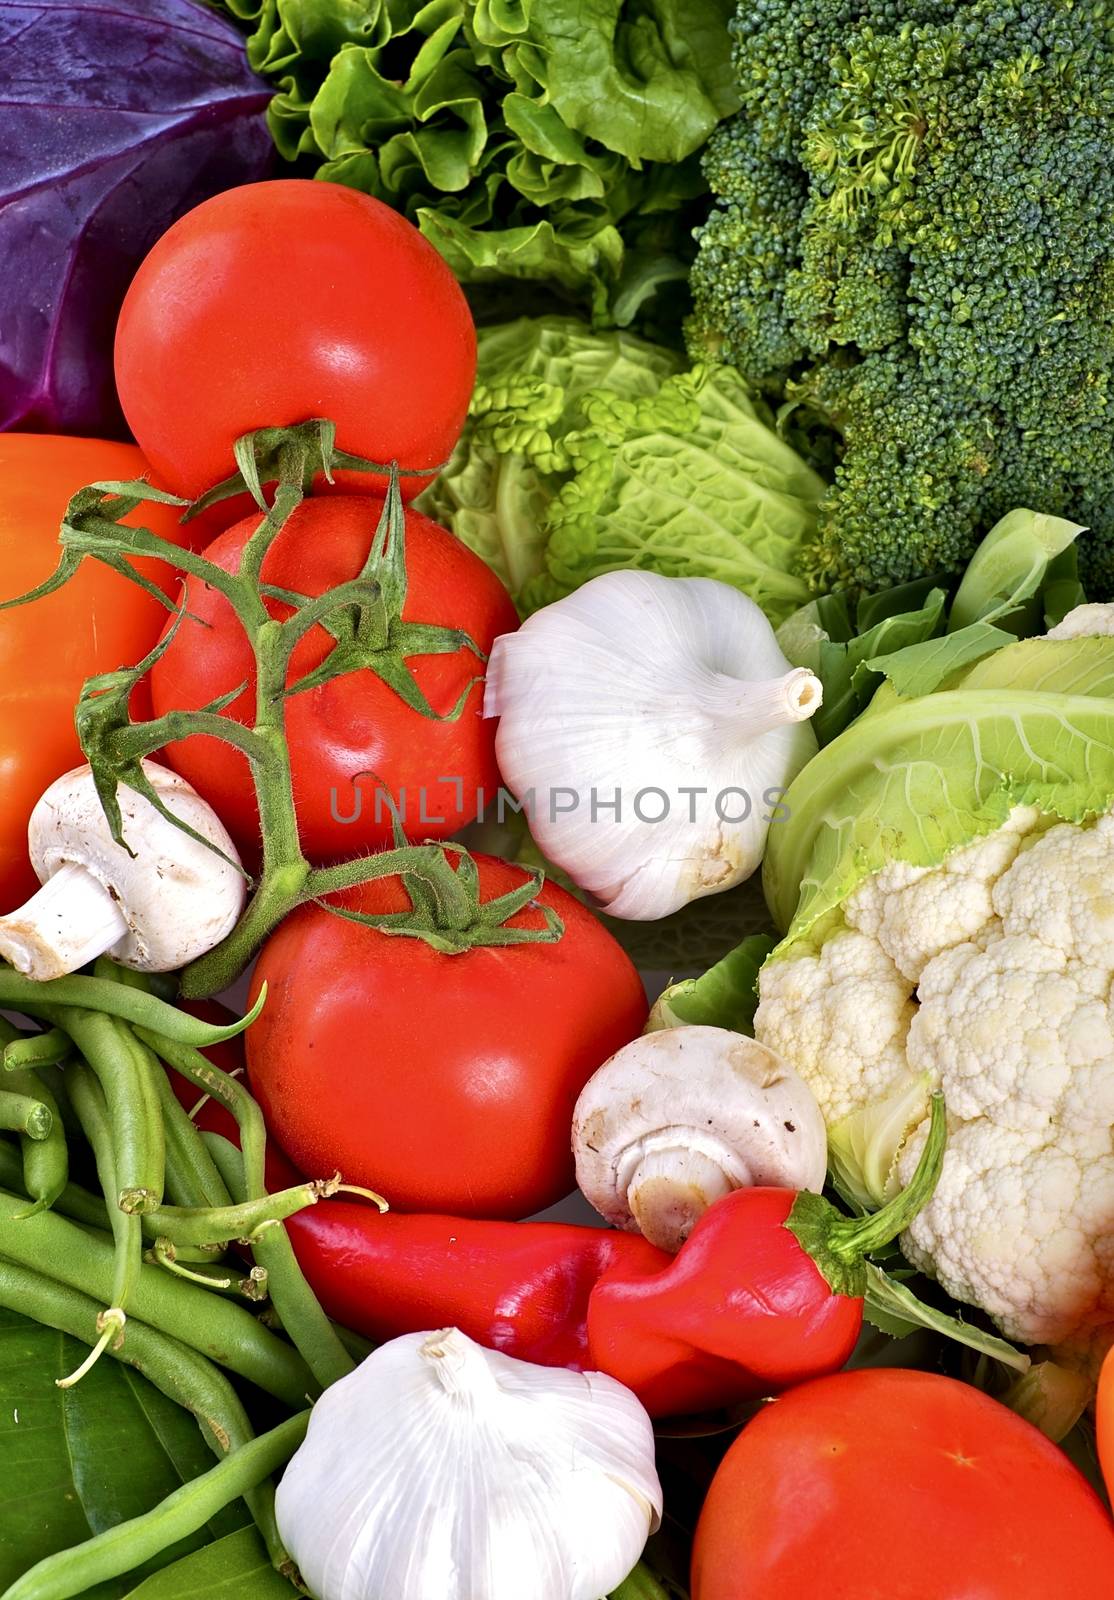 Vegetables Vertical Photo. Multi Vegetables Composition. Tomatoes, Garlic, Greens, Mushrooms and Broccoli. Vegetables Vertical Photography